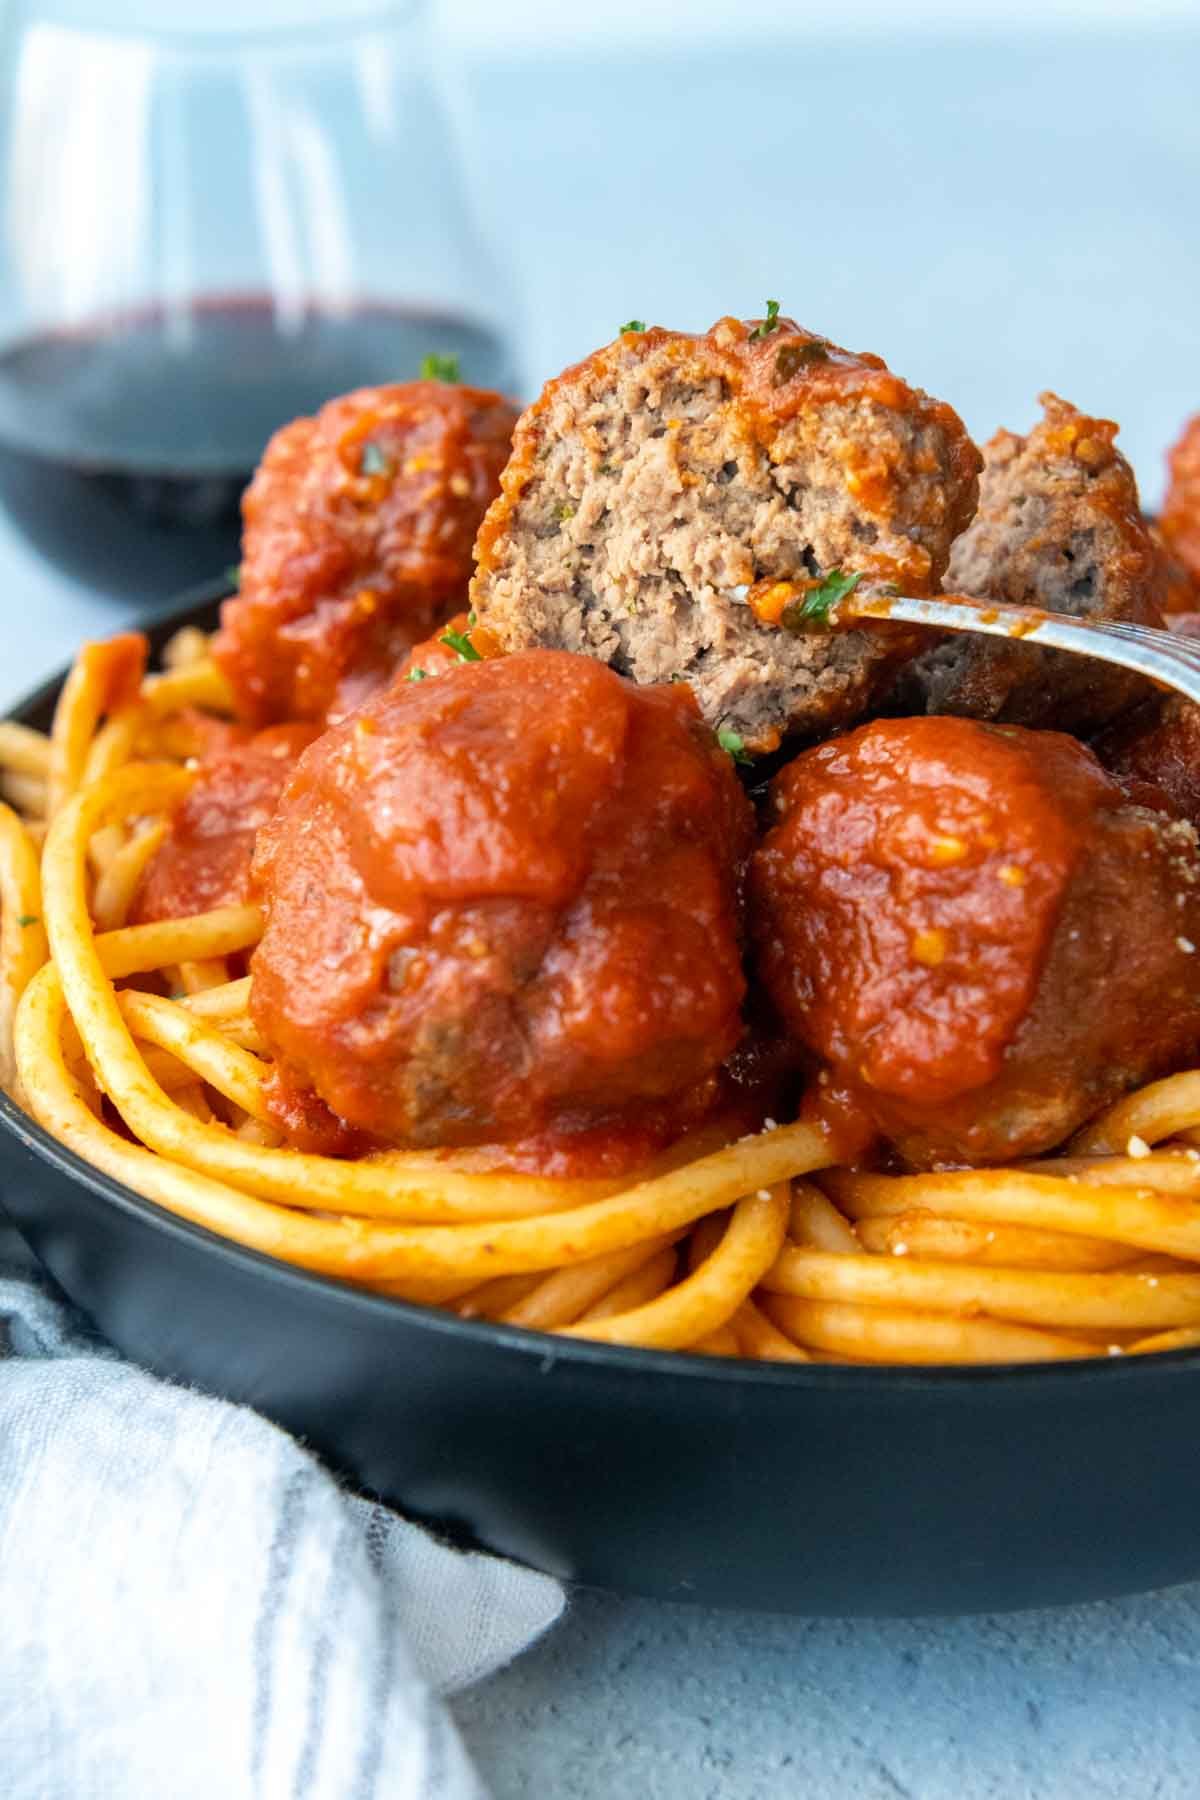 a meatball speared with a fork that has been cup open.